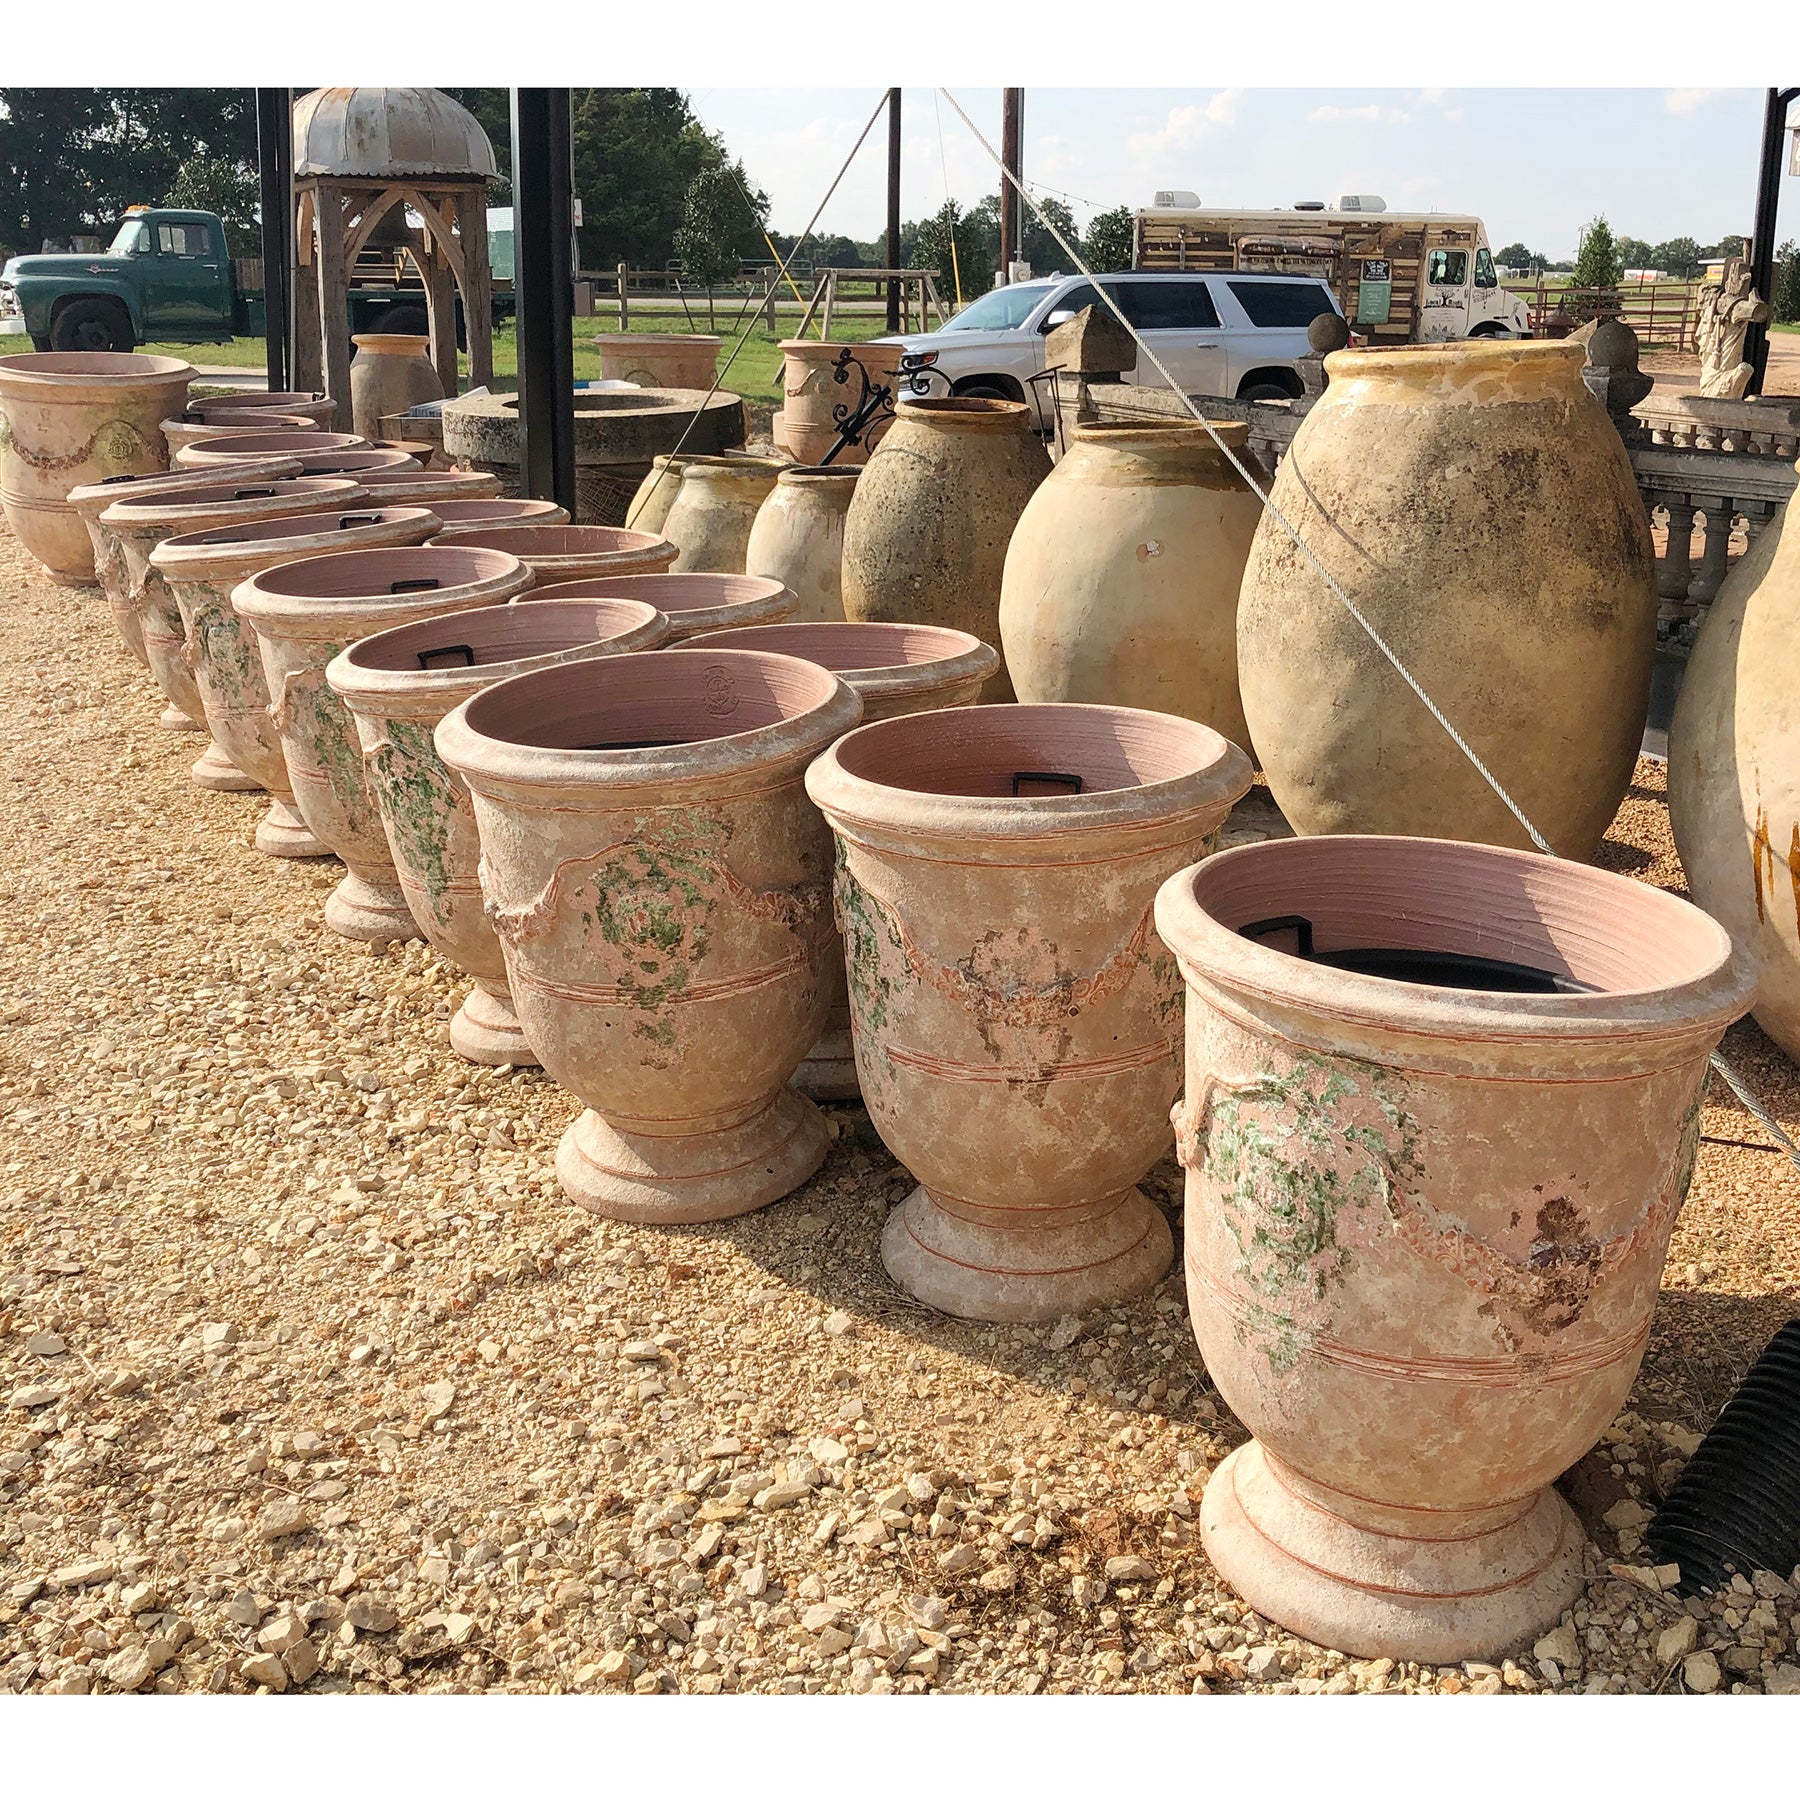 Anduze Versailles '32' Terracotta Pot - One available in Round Top, Te -  Alisanne Wonderland